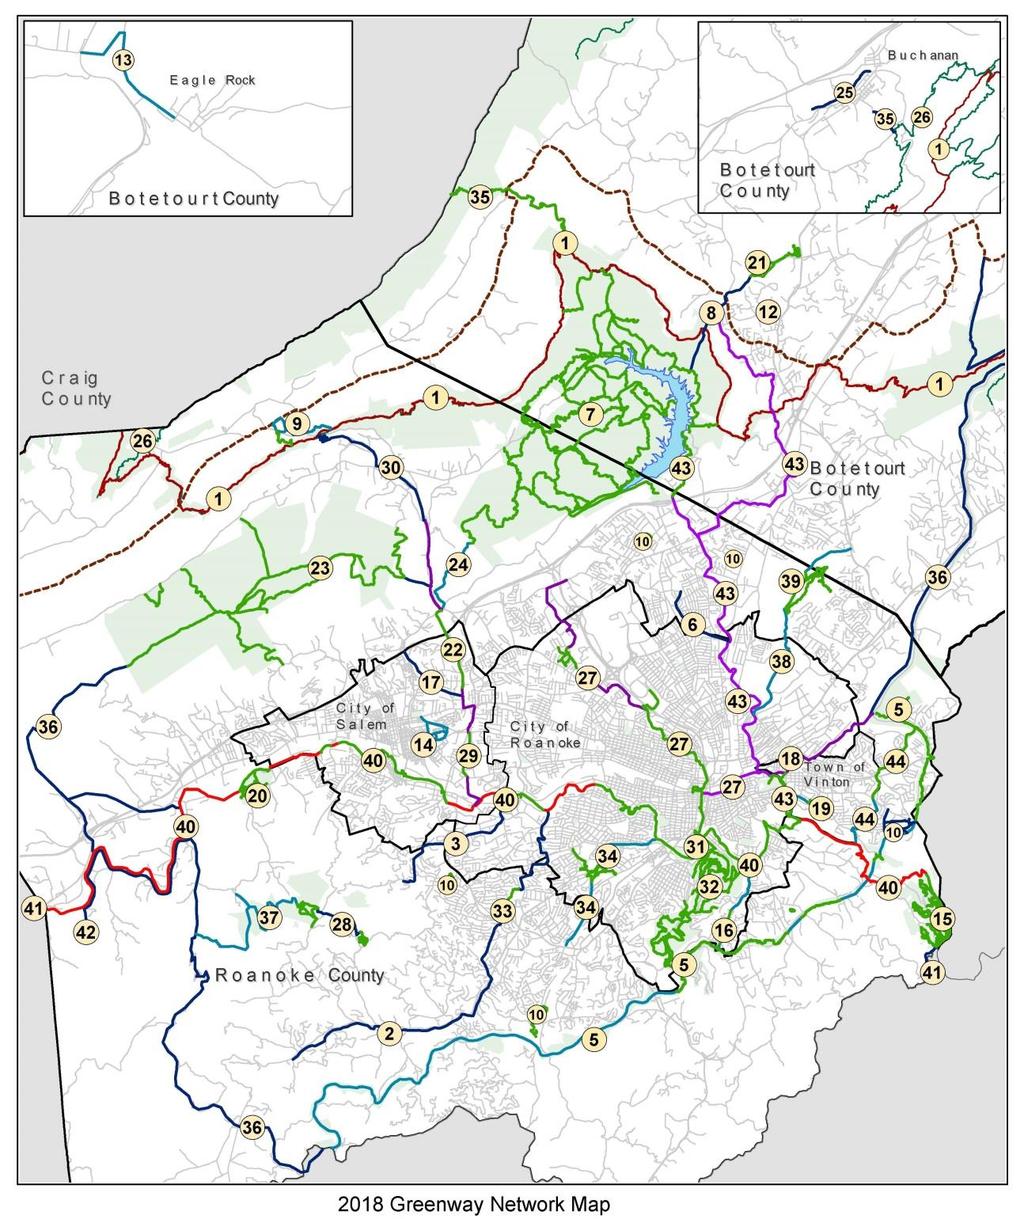 Related Transportation Projects: Greenways Roanoke Valley Greenway Plan 2007 Plan: Tinker Creek Greenway identified as Priority 2 2018 Update underway with Tinker Creek Greenway identified as a